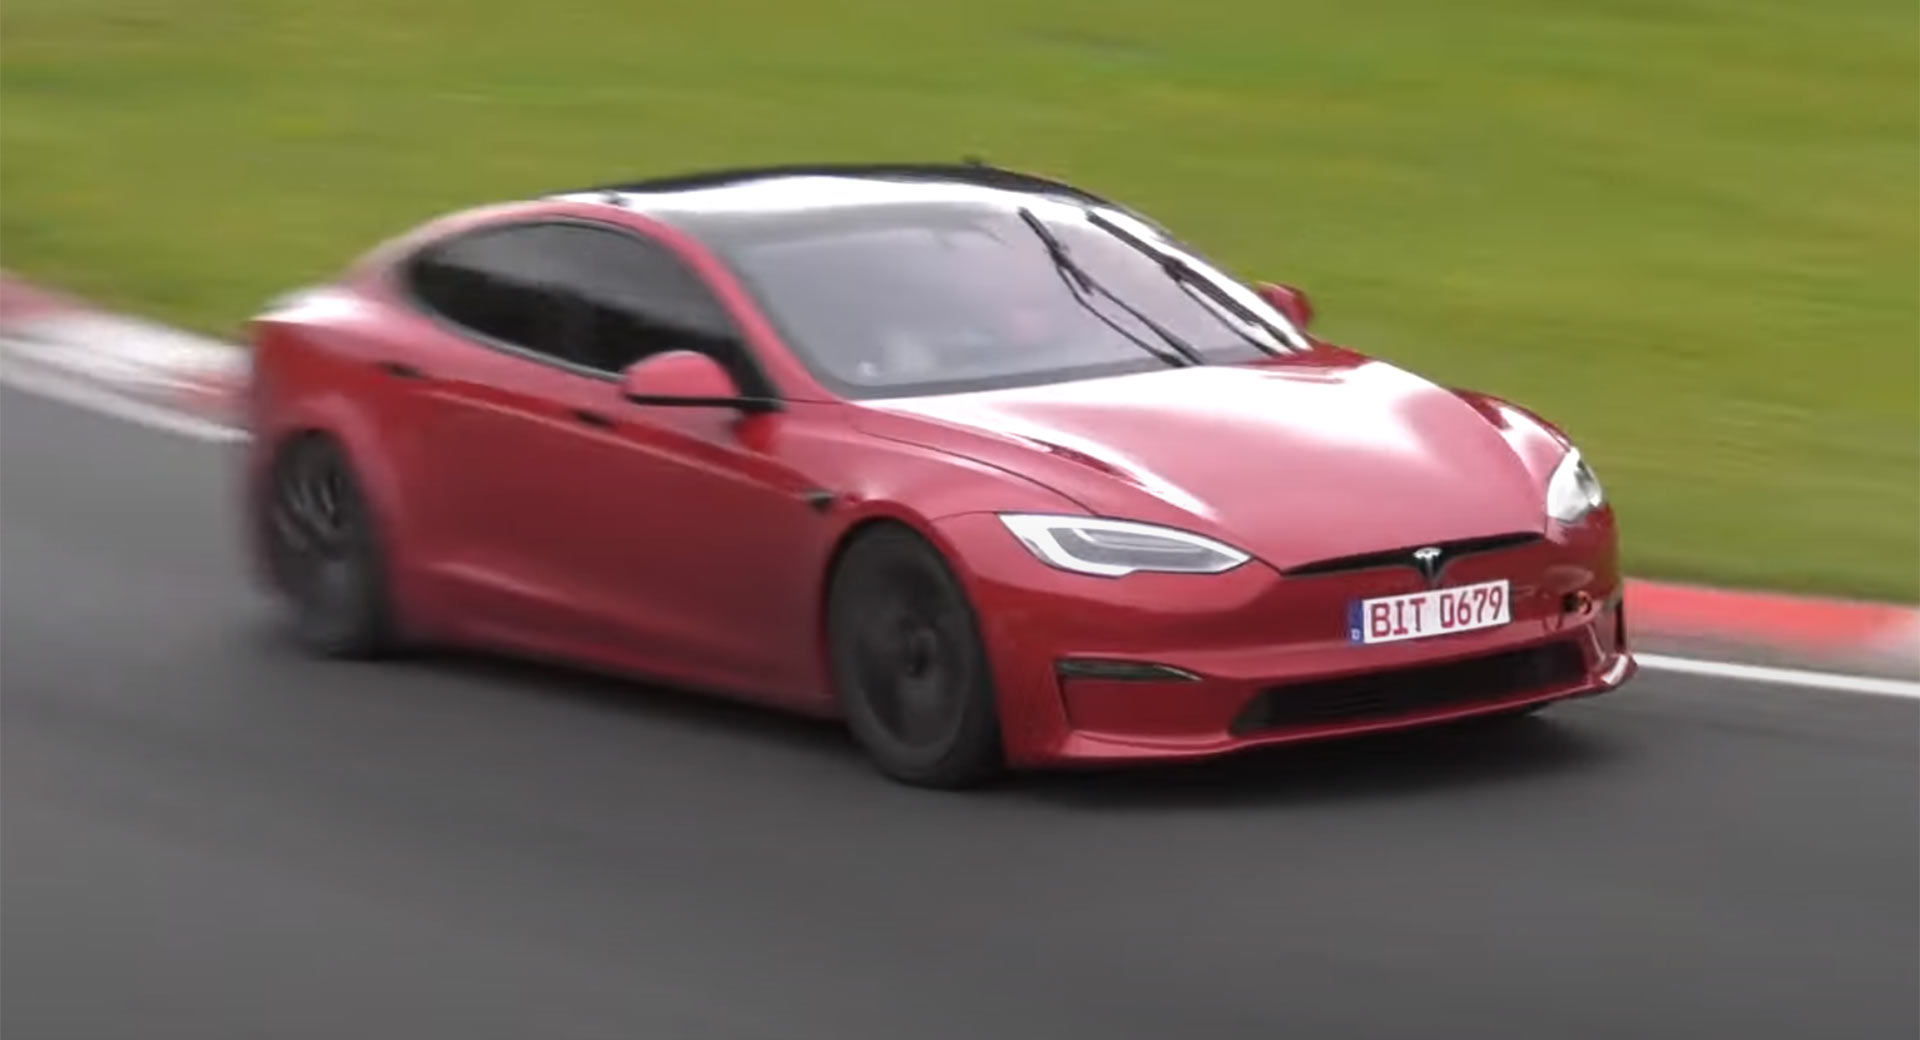 Watch The Tesla Model S Plaid Being Tested To Its Limits At The Nurburgring